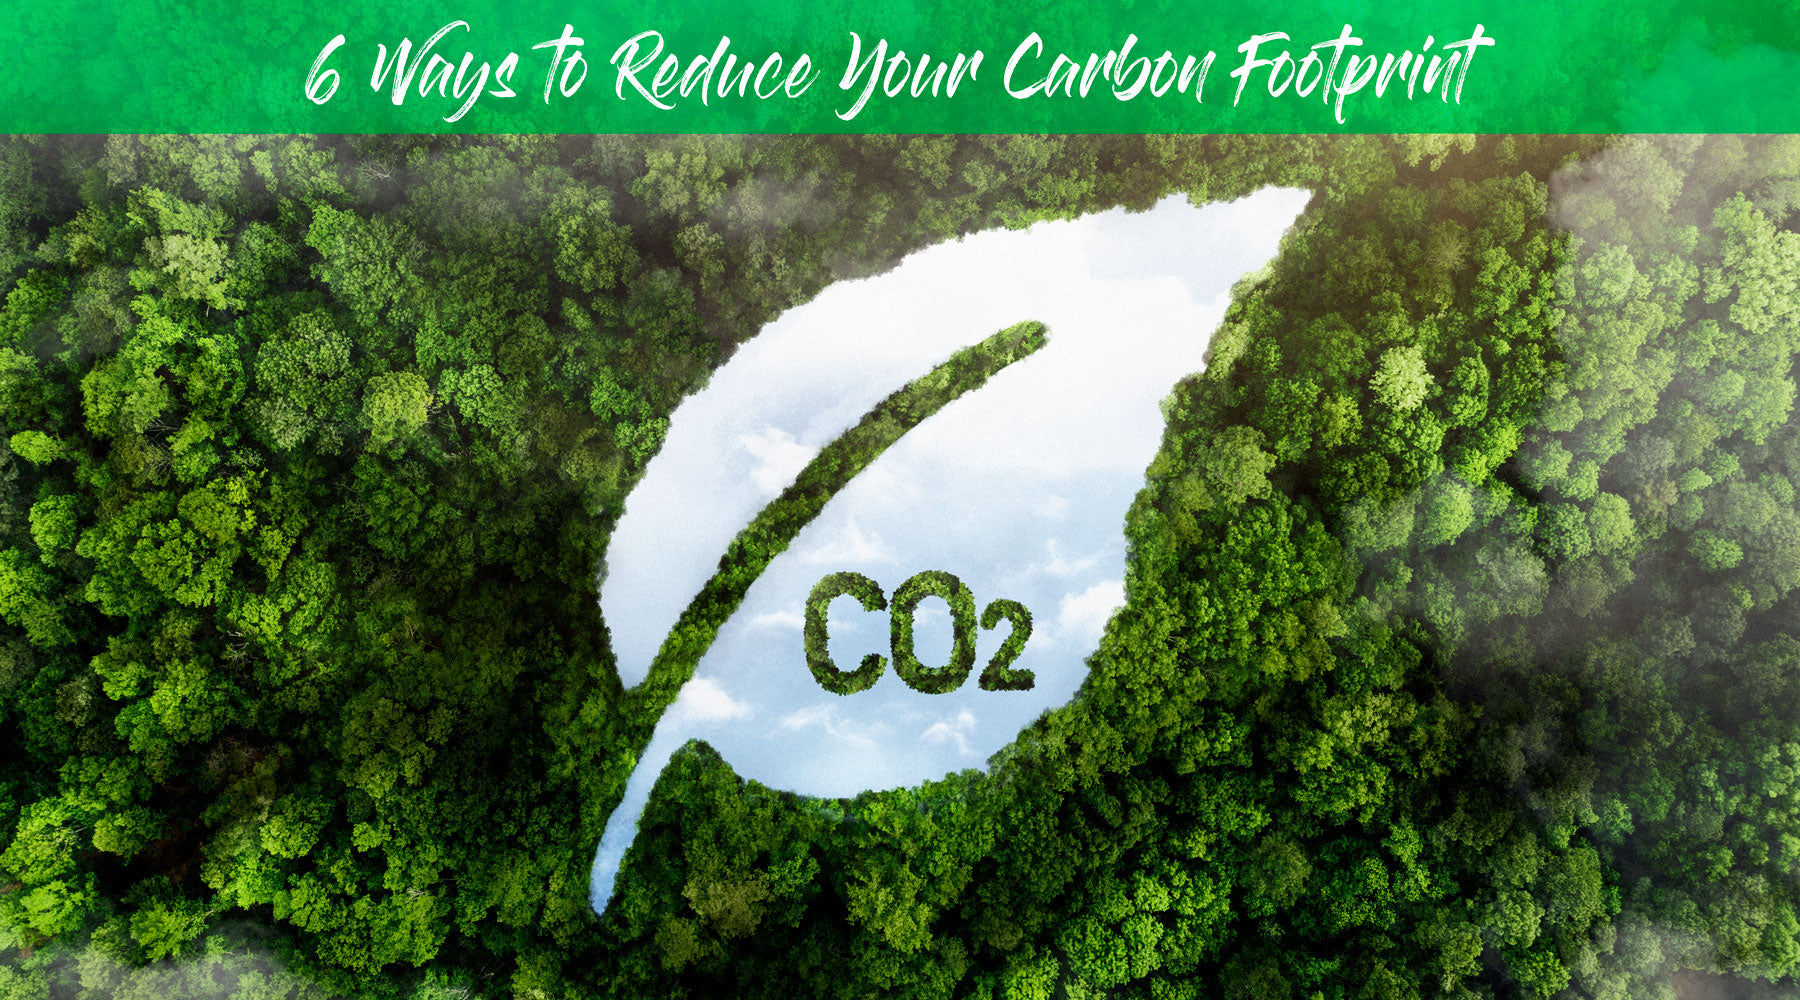 6 Ways to Reduce Your Carbon Footprint